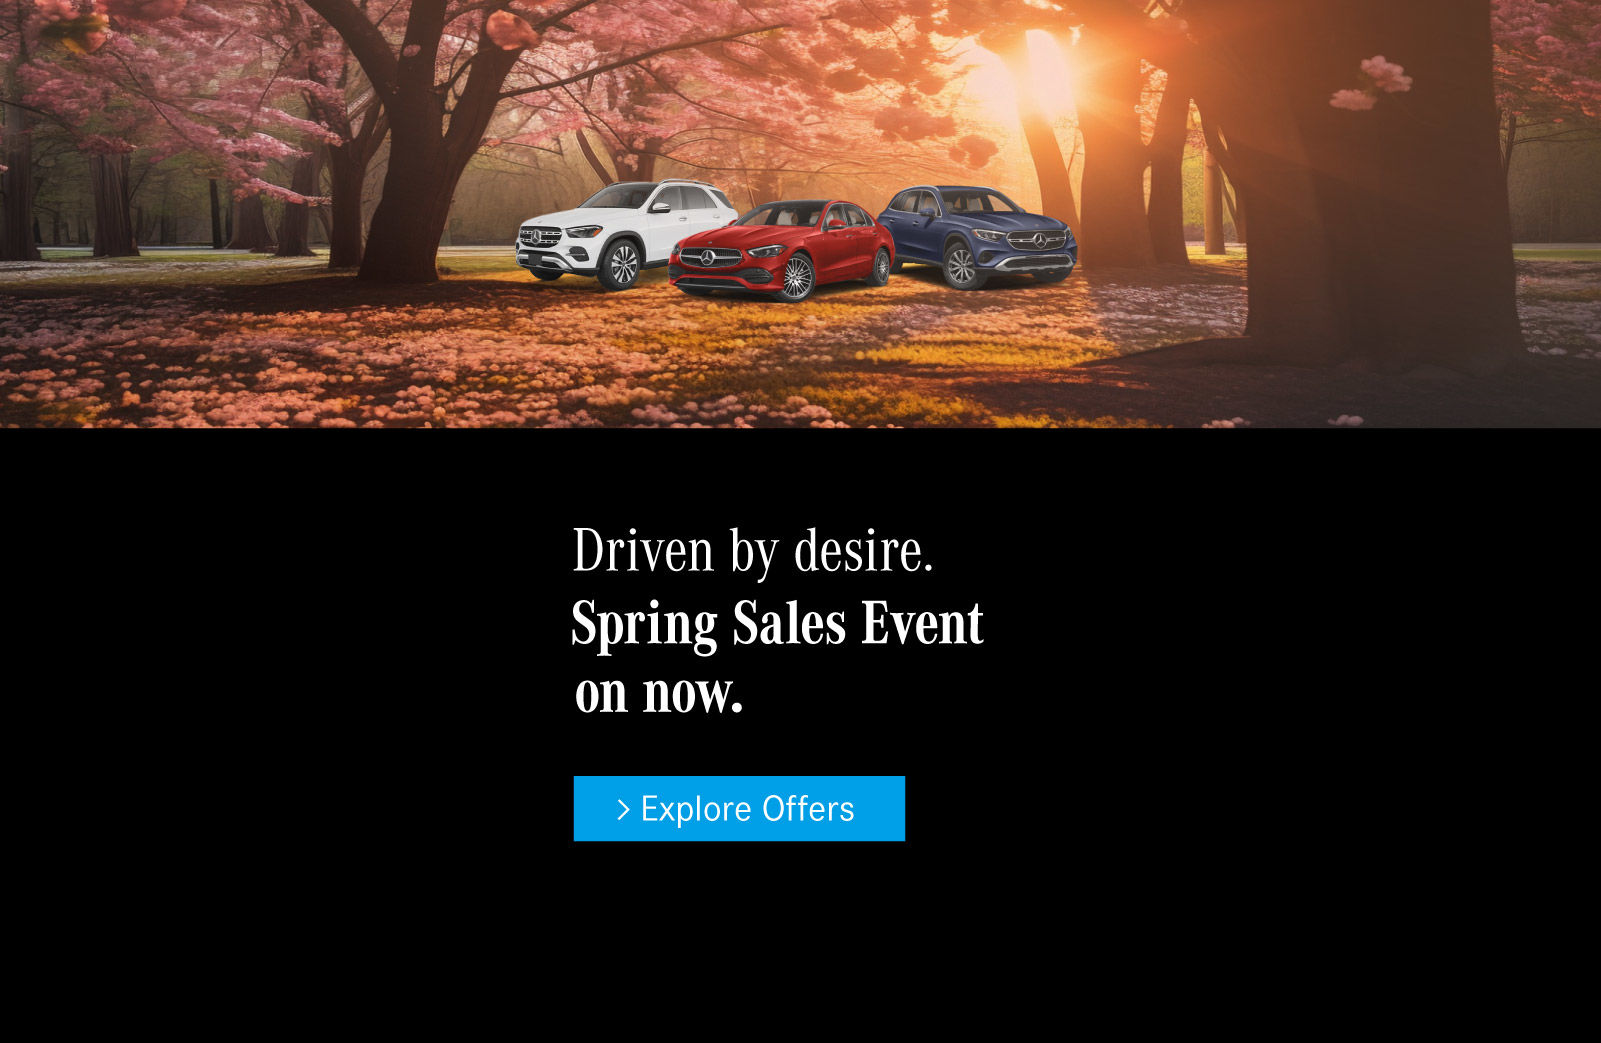 Driven by Desire Spring Sales Event Event at Mercedes-Benz Brampton